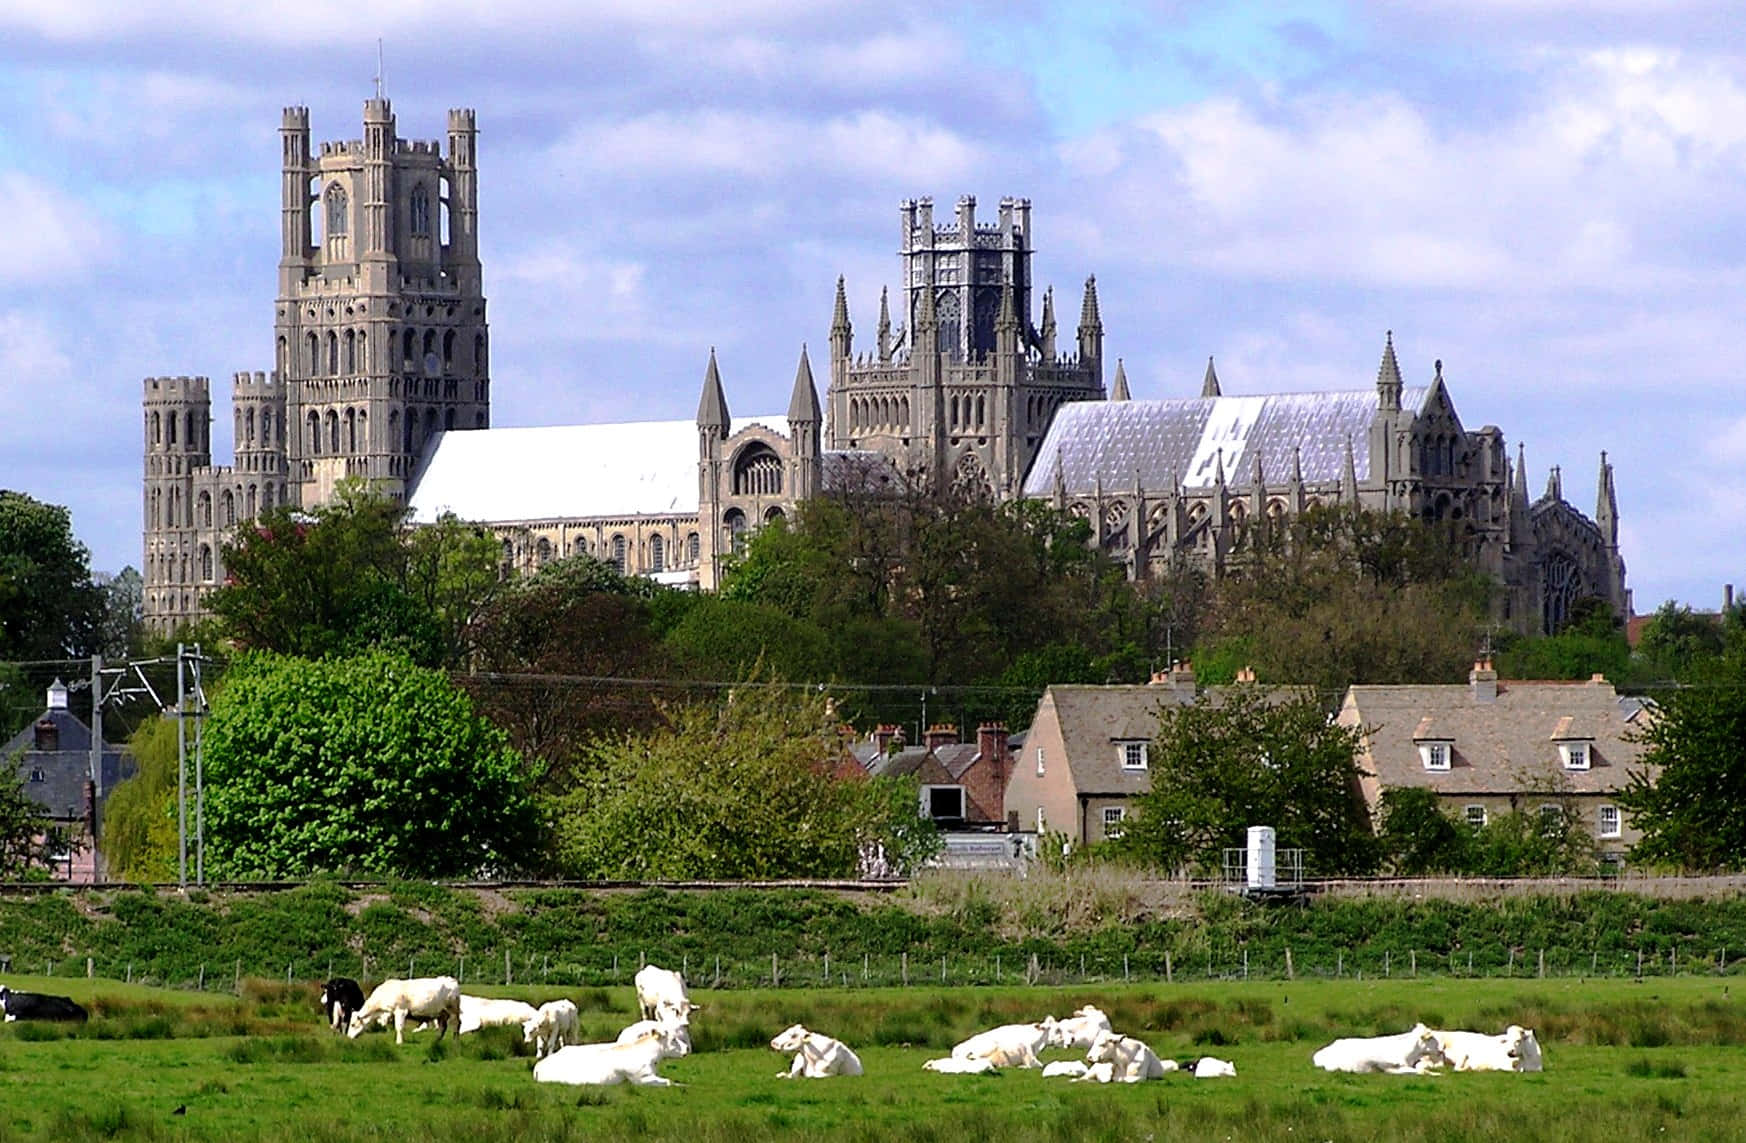 Majestic View Of Ely Cathedral Dominating The Skyline Of Ely, United Kingdom Wallpaper